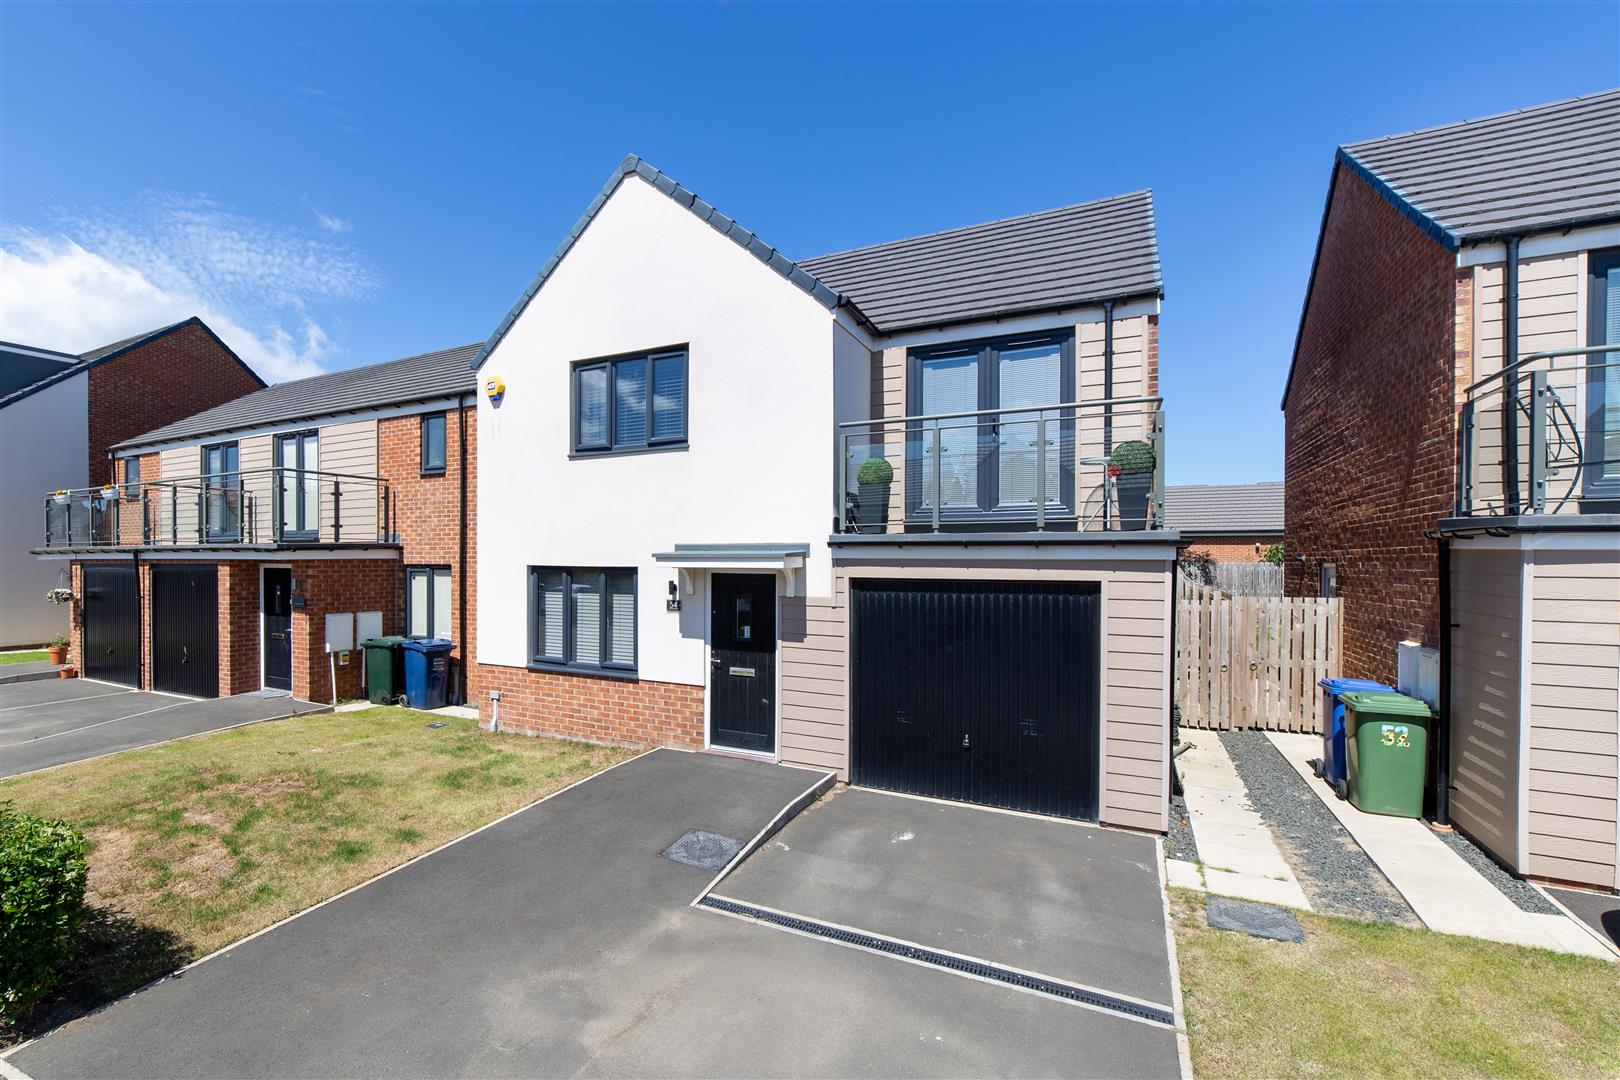 4 bed detached house for sale in Orangetip Gardens, Great Park - Property Image 1